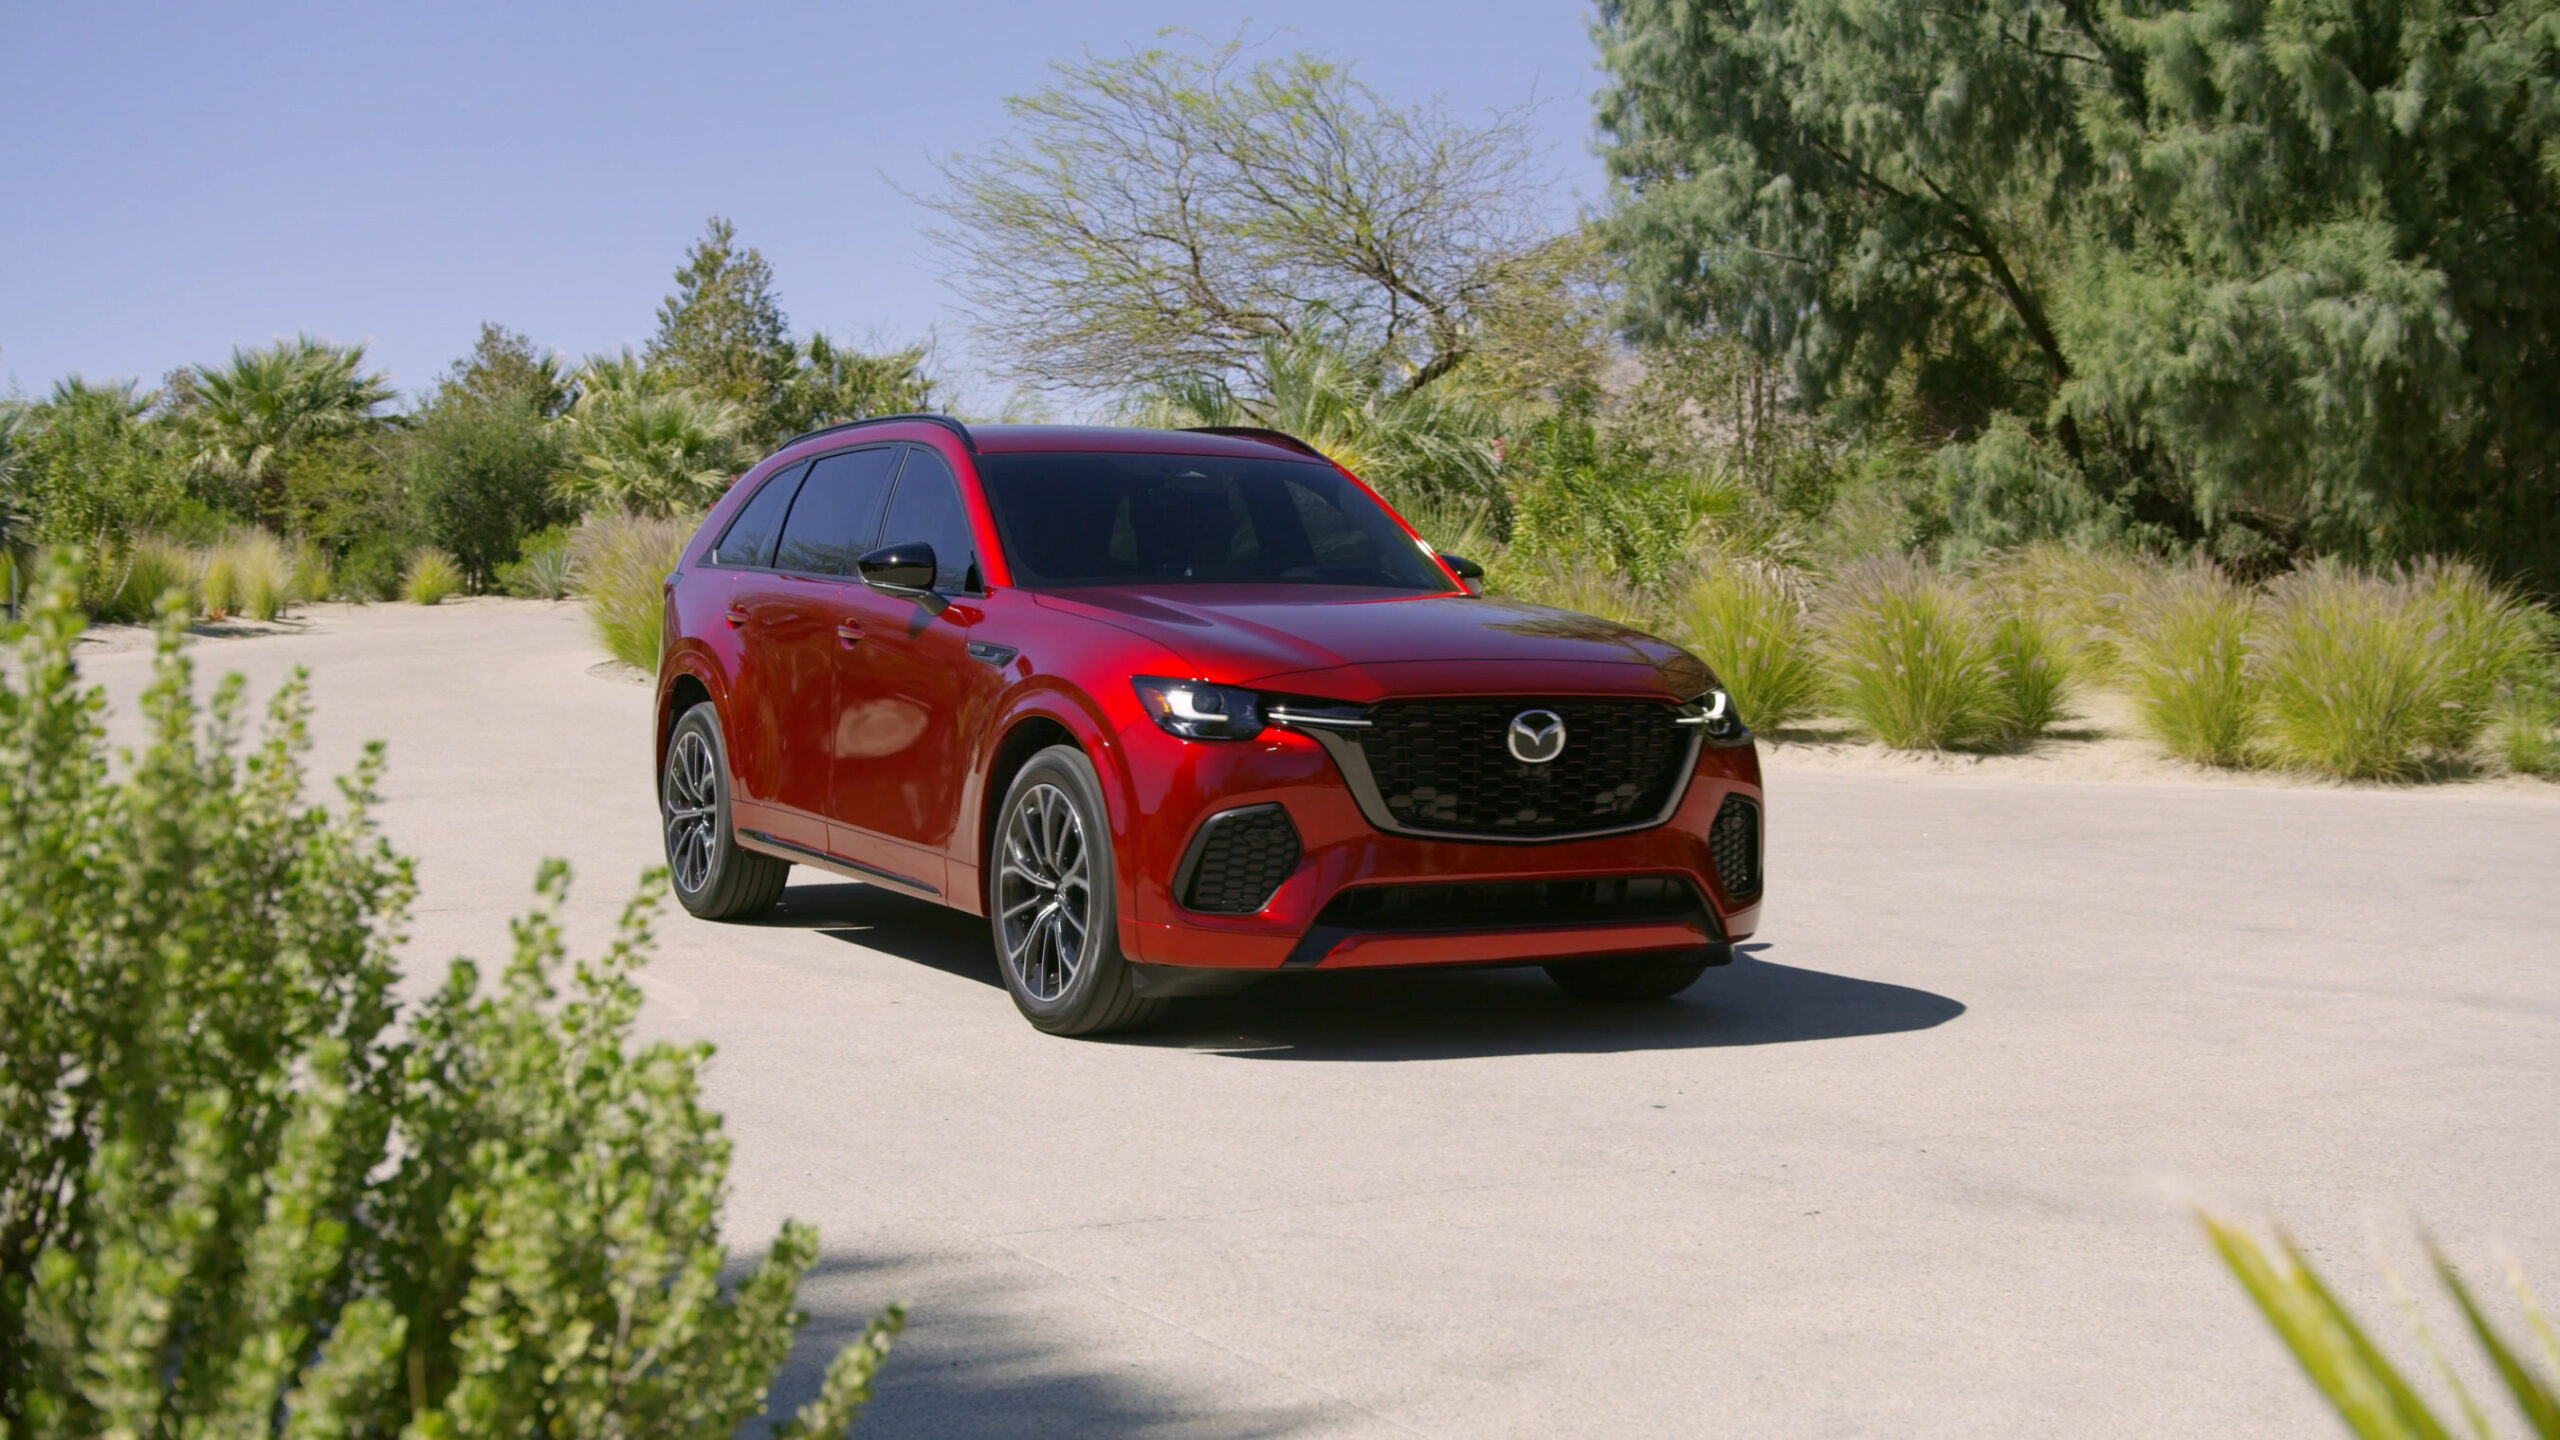 A Mazda survey reveals nearly half of car-sharing American couples argue monthly over vehicle adjustments, highlighting the importance of personalized driving settings.